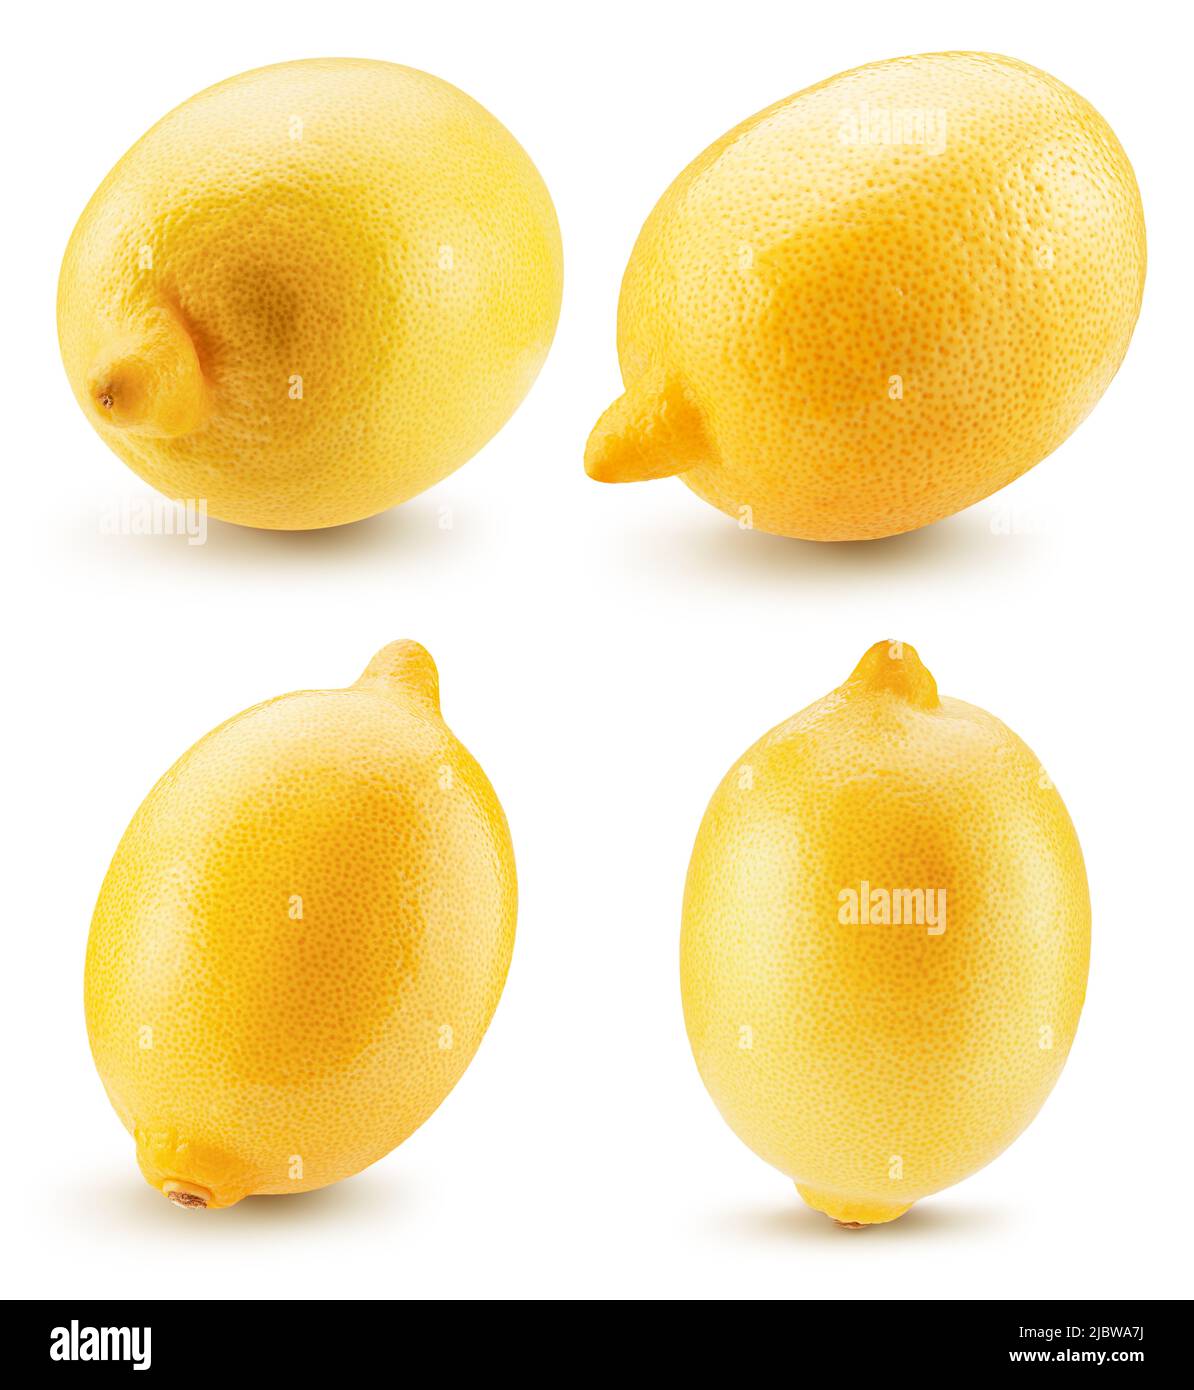 collection of lemons isolated on a white background with clipping path. Stock Photo